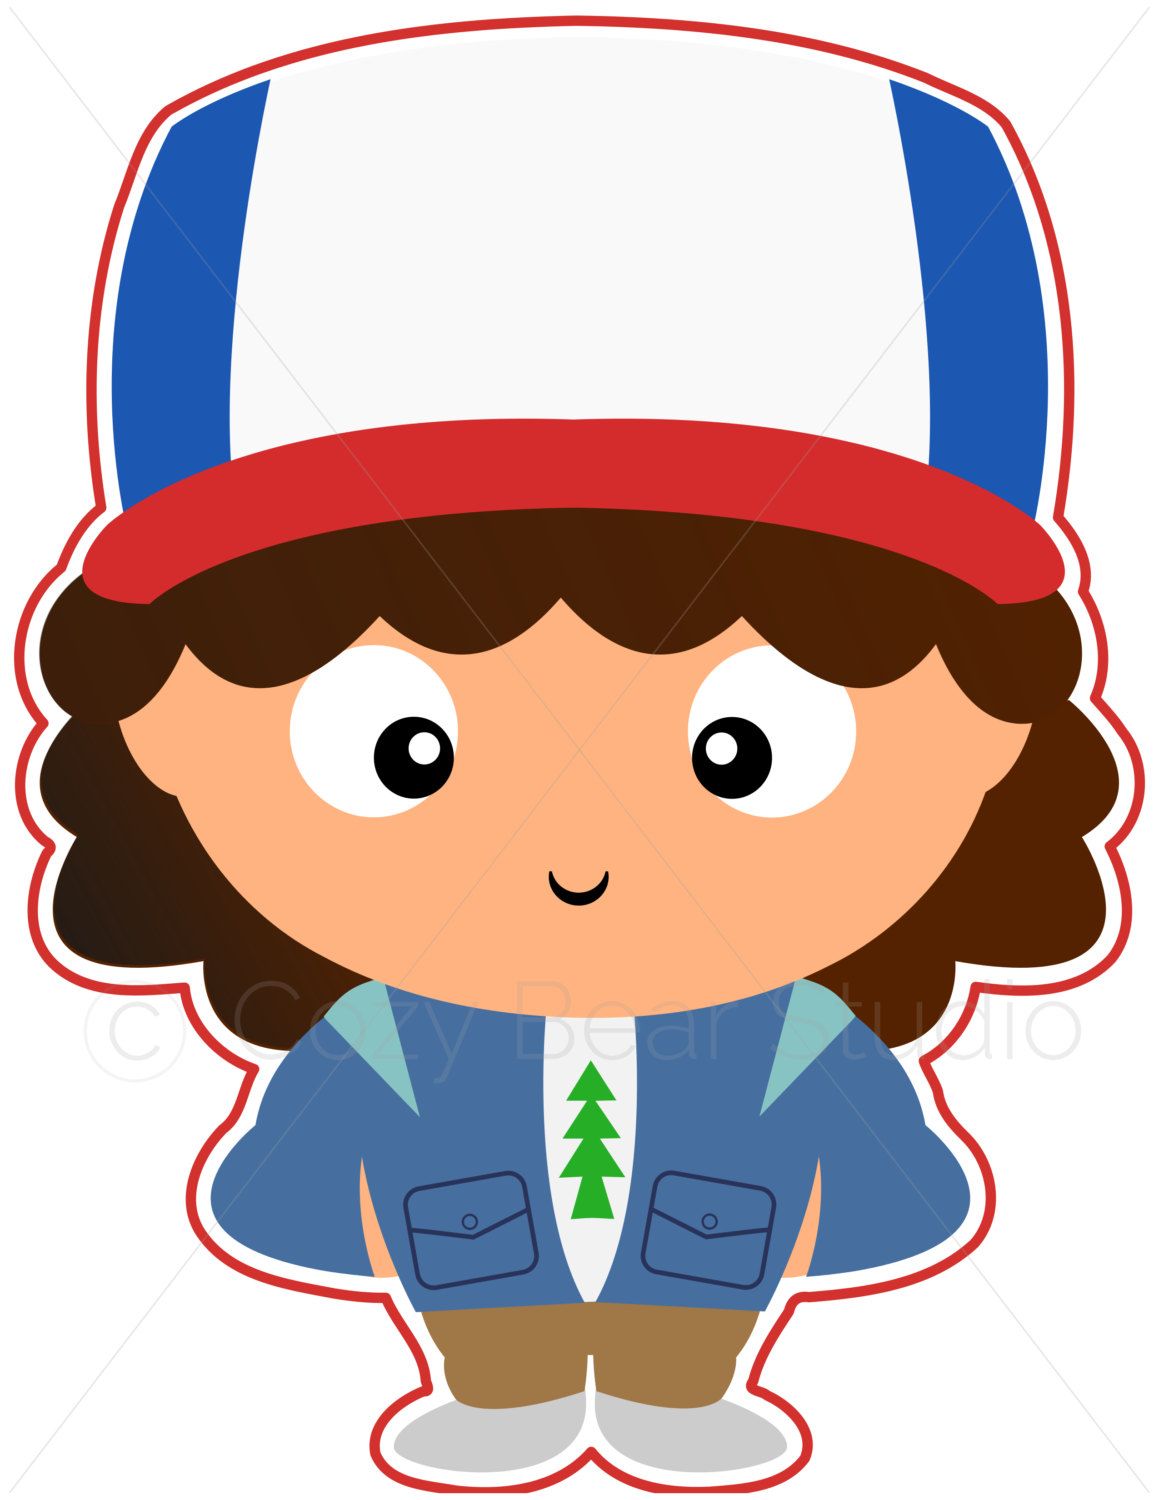 Collection of Stranger things clipart. Free download best